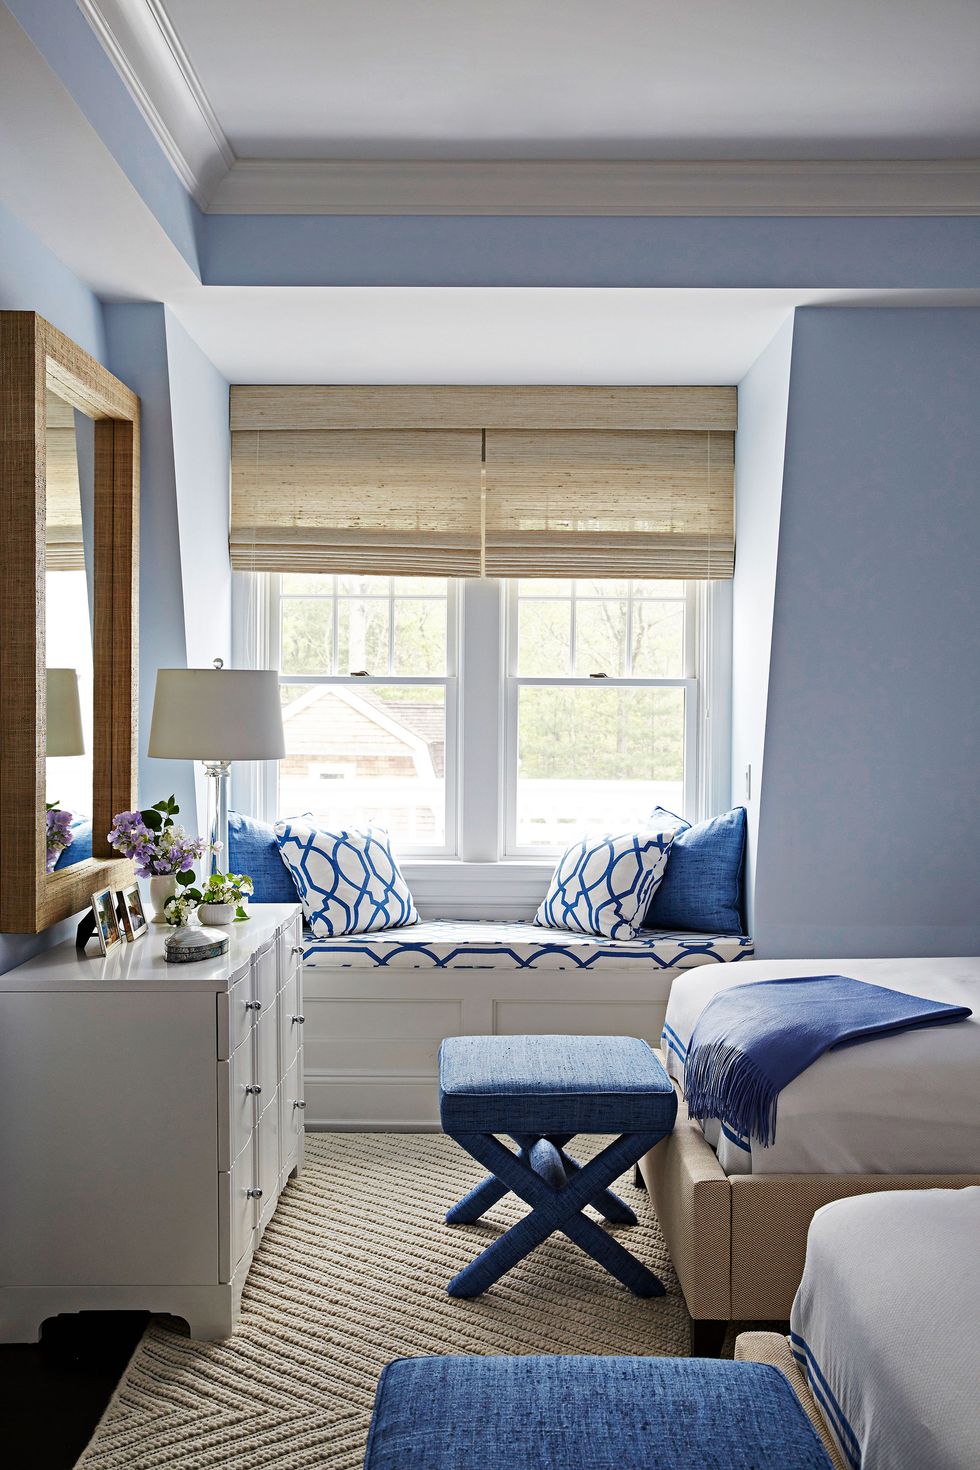 18 Tips to Make Your Guest Room Feel Like Home